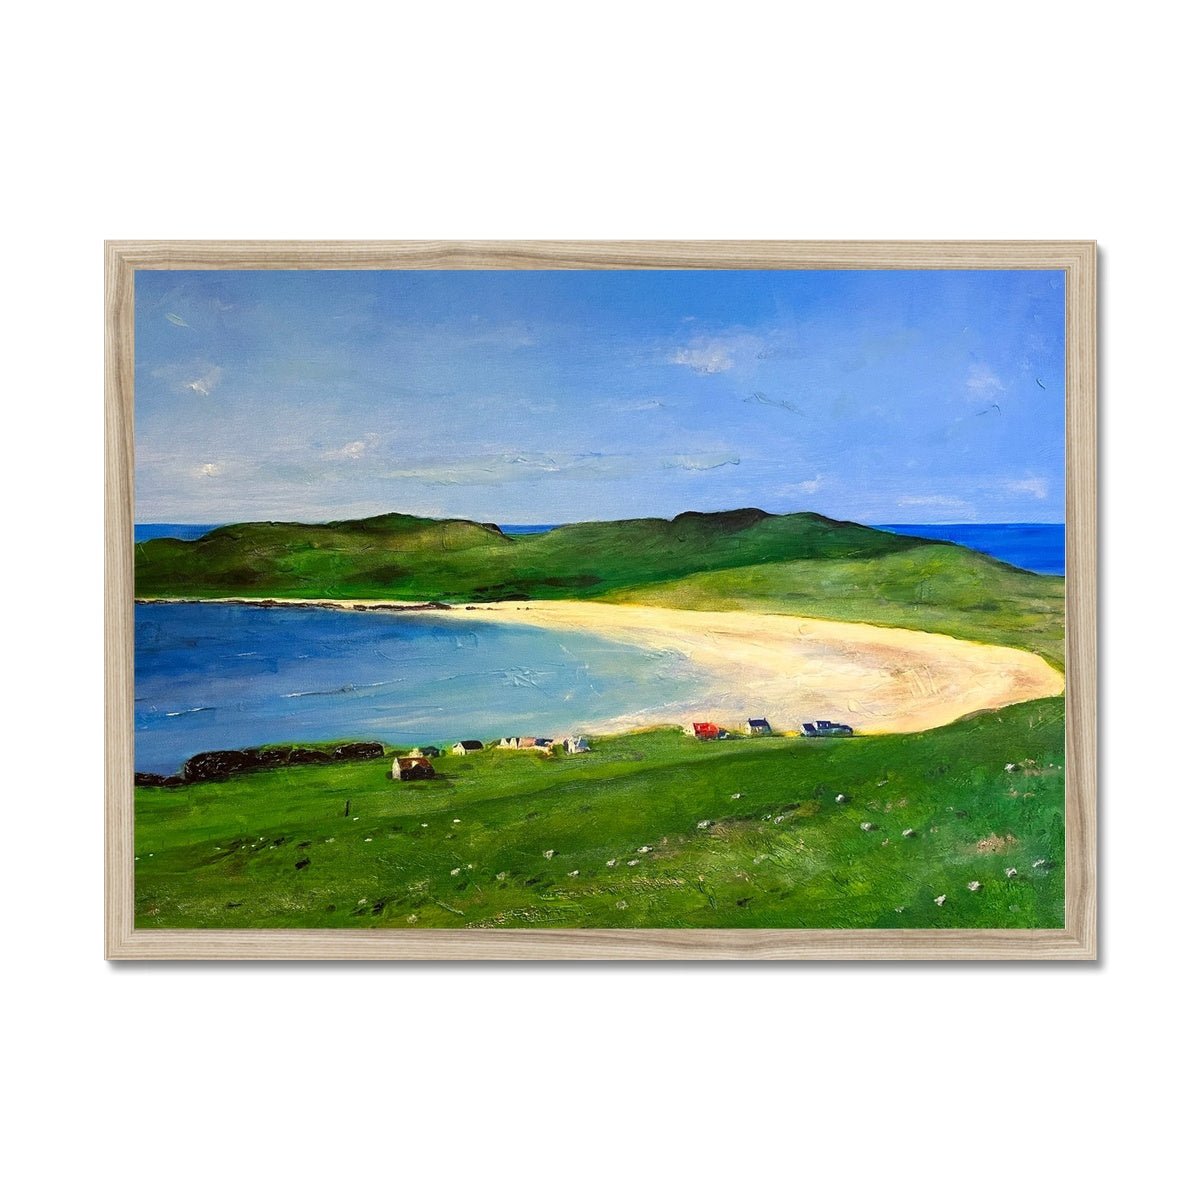 Balephuil Beach Tiree Painting | Framed Prints From Scotland-Framed Prints-Hebridean Islands Art Gallery-A2 Landscape-Natural Frame-Paintings, Prints, Homeware, Art Gifts From Scotland By Scottish Artist Kevin Hunter